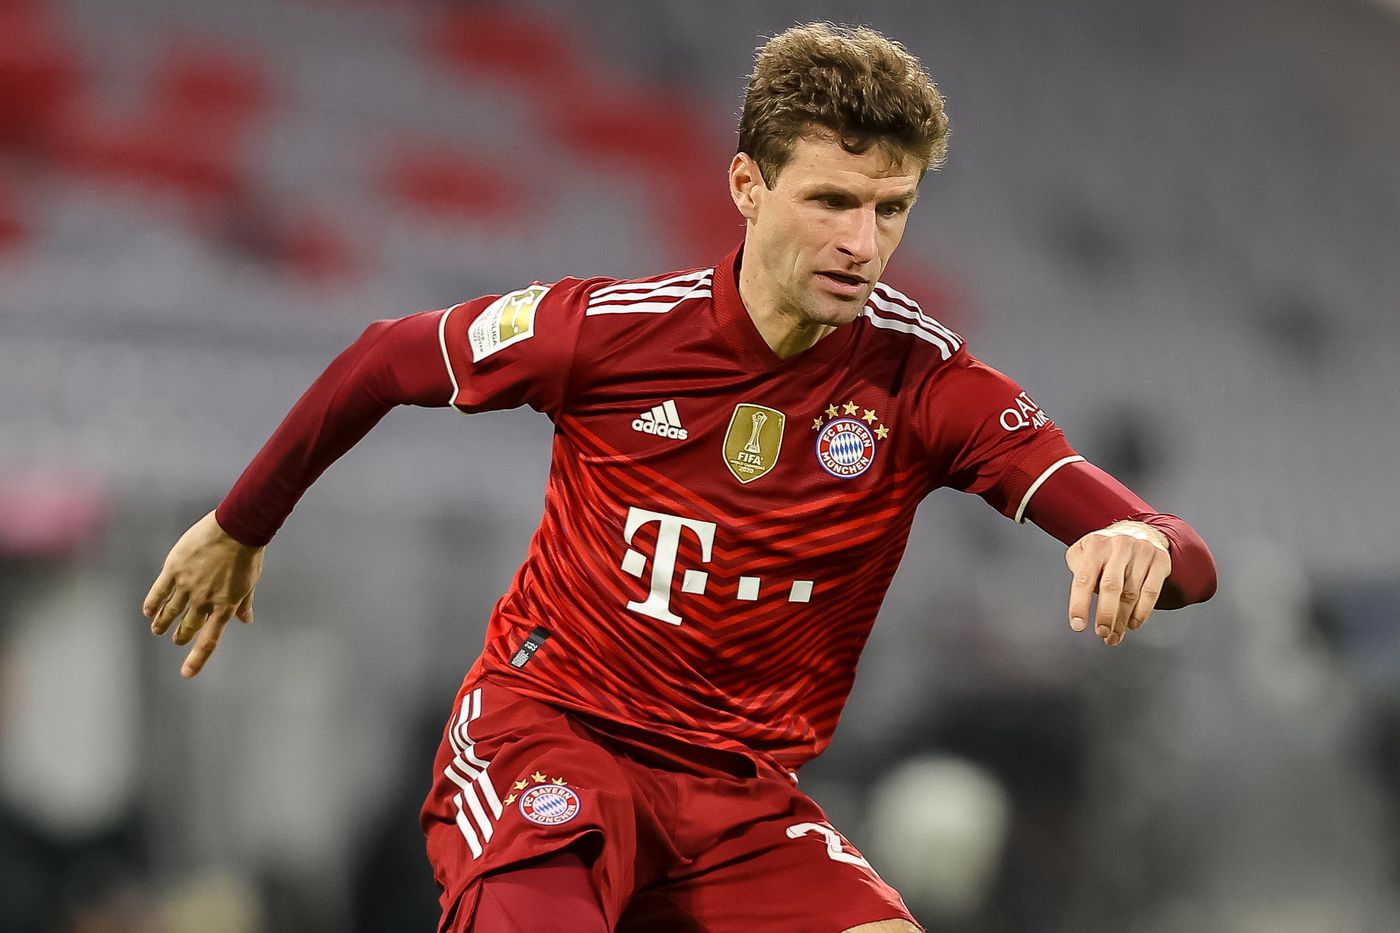 No excuses: Bayern Munich's Thomas Müller only has getting three points on his mind ahead of Gladbach tilt Football Works